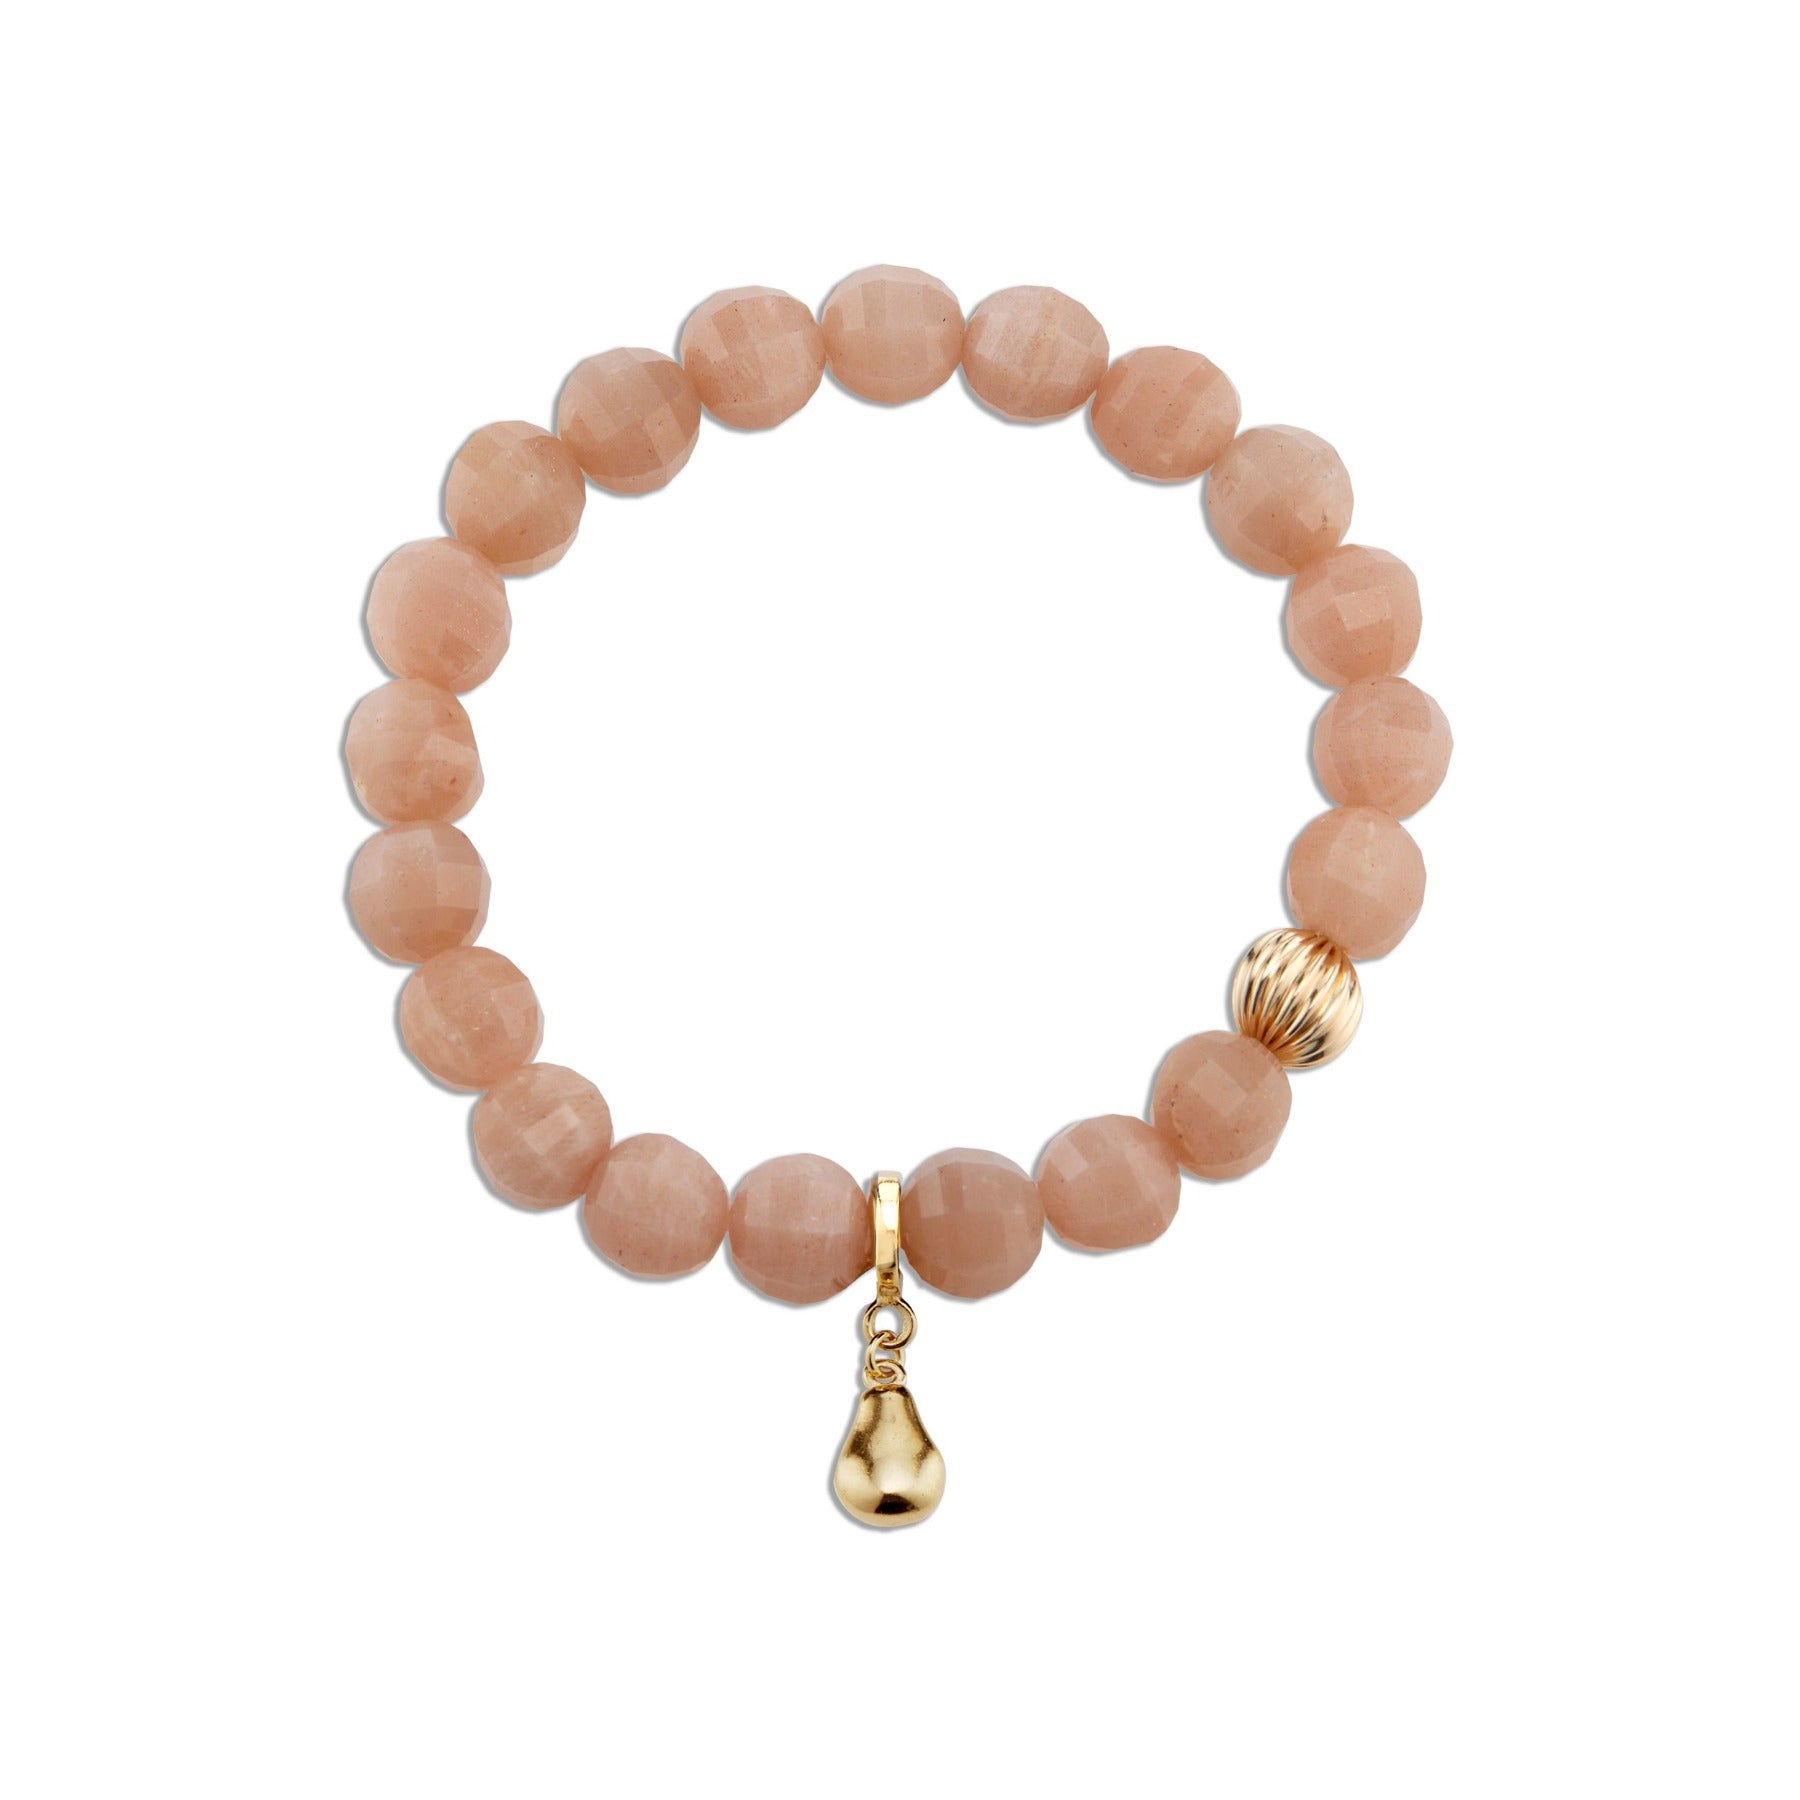 Peach moonstone crystal faceted gemstone elastic bracelet with 14k gold corrugated bead and pear charm.